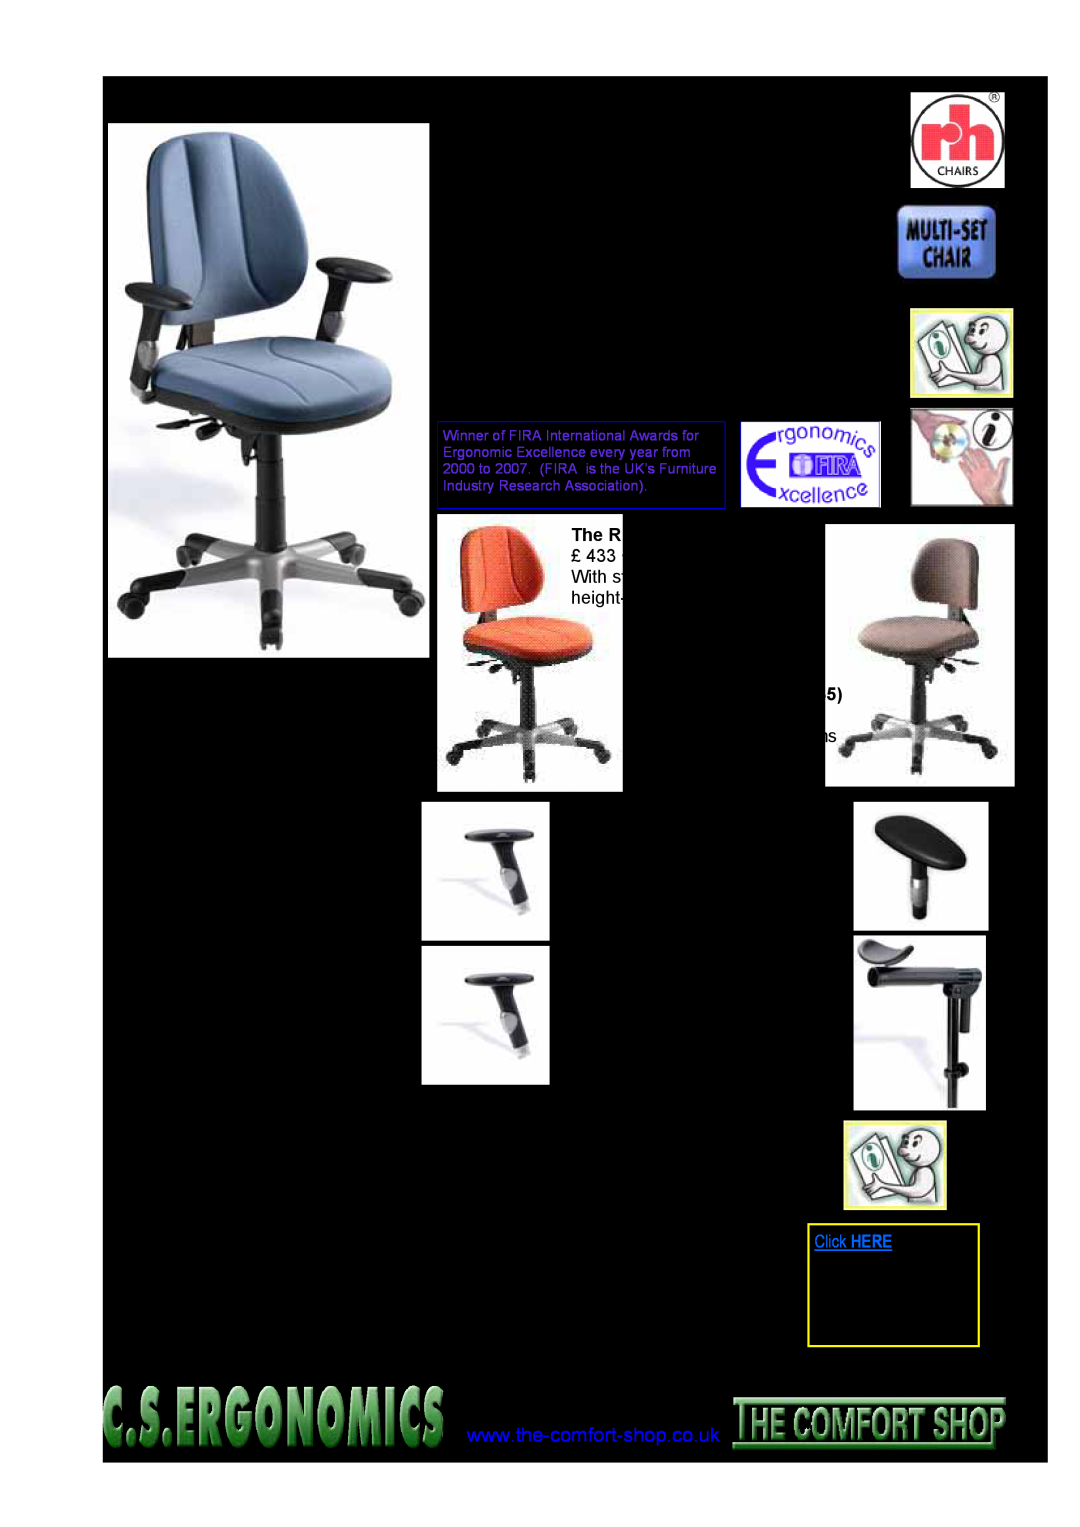 Fellowes RH 400 The RH Activ chairs, asimpler multi-setmechanism, Swivel-toparms, Relax 3-Dfloating armrests, Click HERE 